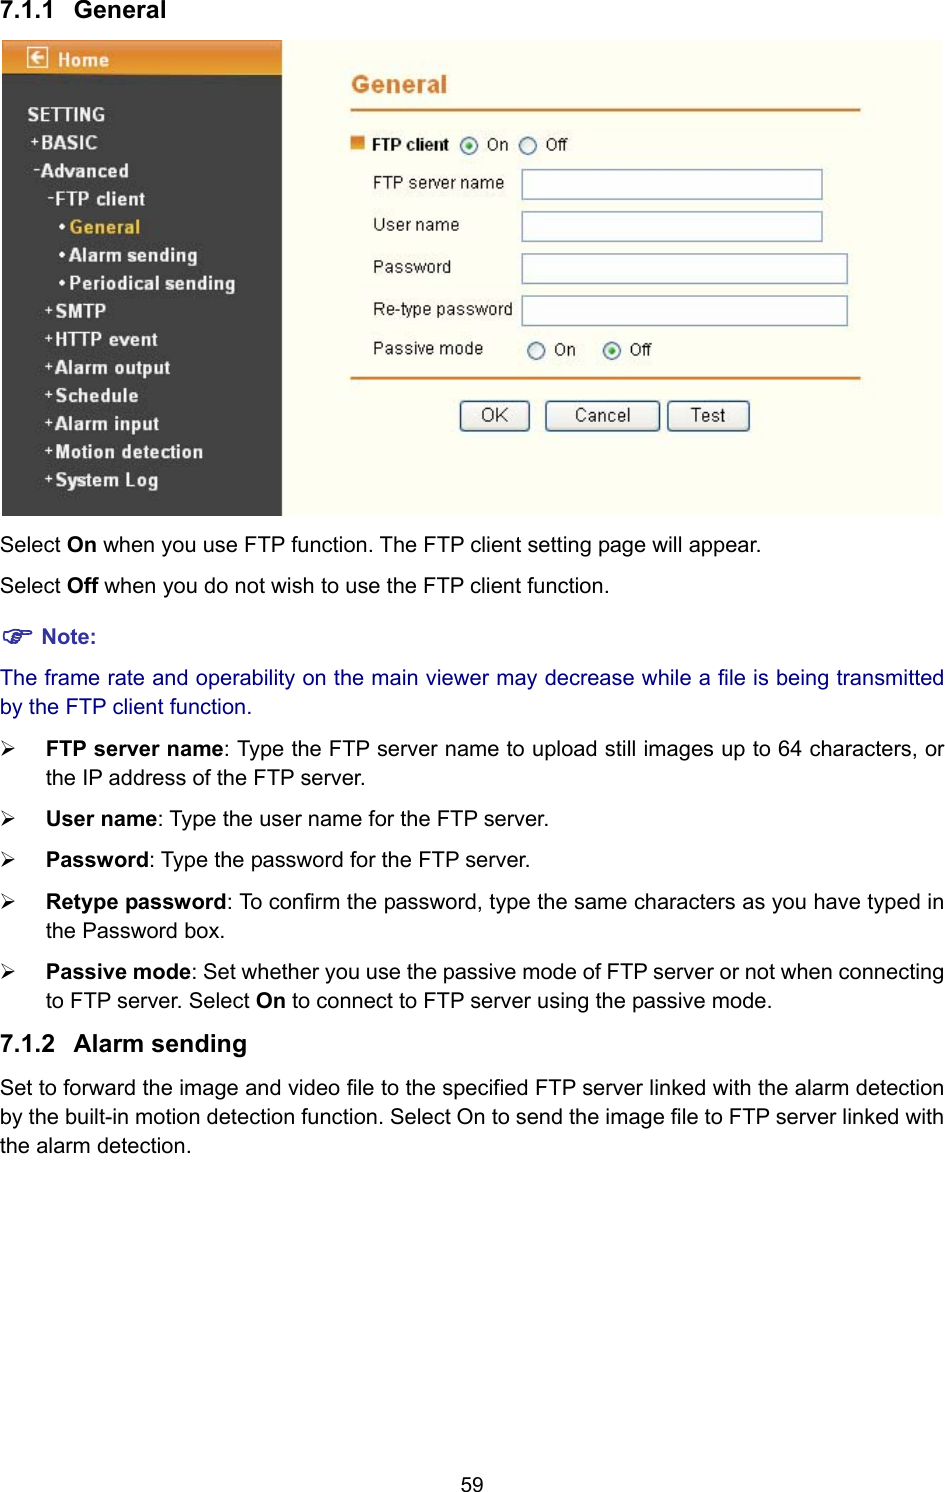 59 7.1.1  General  Select On when you use FTP function. The FTP client setting page will appear.   Select Off when you do not wish to use the FTP client function. ) Note: The frame rate and operability on the main viewer may decrease while a file is being transmitted by the FTP client function.   ¾ FTP server name: Type the FTP server name to upload still images up to 64 characters, or the IP address of the FTP server. ¾ User name: Type the user name for the FTP server. ¾ Password: Type the password for the FTP server. ¾ Retype password: To confirm the password, type the same characters as you have typed in the Password box. ¾ Passive mode: Set whether you use the passive mode of FTP server or not when connecting to FTP server. Select On to connect to FTP server using the passive mode. 7.1.2  Alarm sending  Set to forward the image and video file to the specified FTP server linked with the alarm detection by the built-in motion detection function. Select On to send the image file to FTP server linked with the alarm detection. 